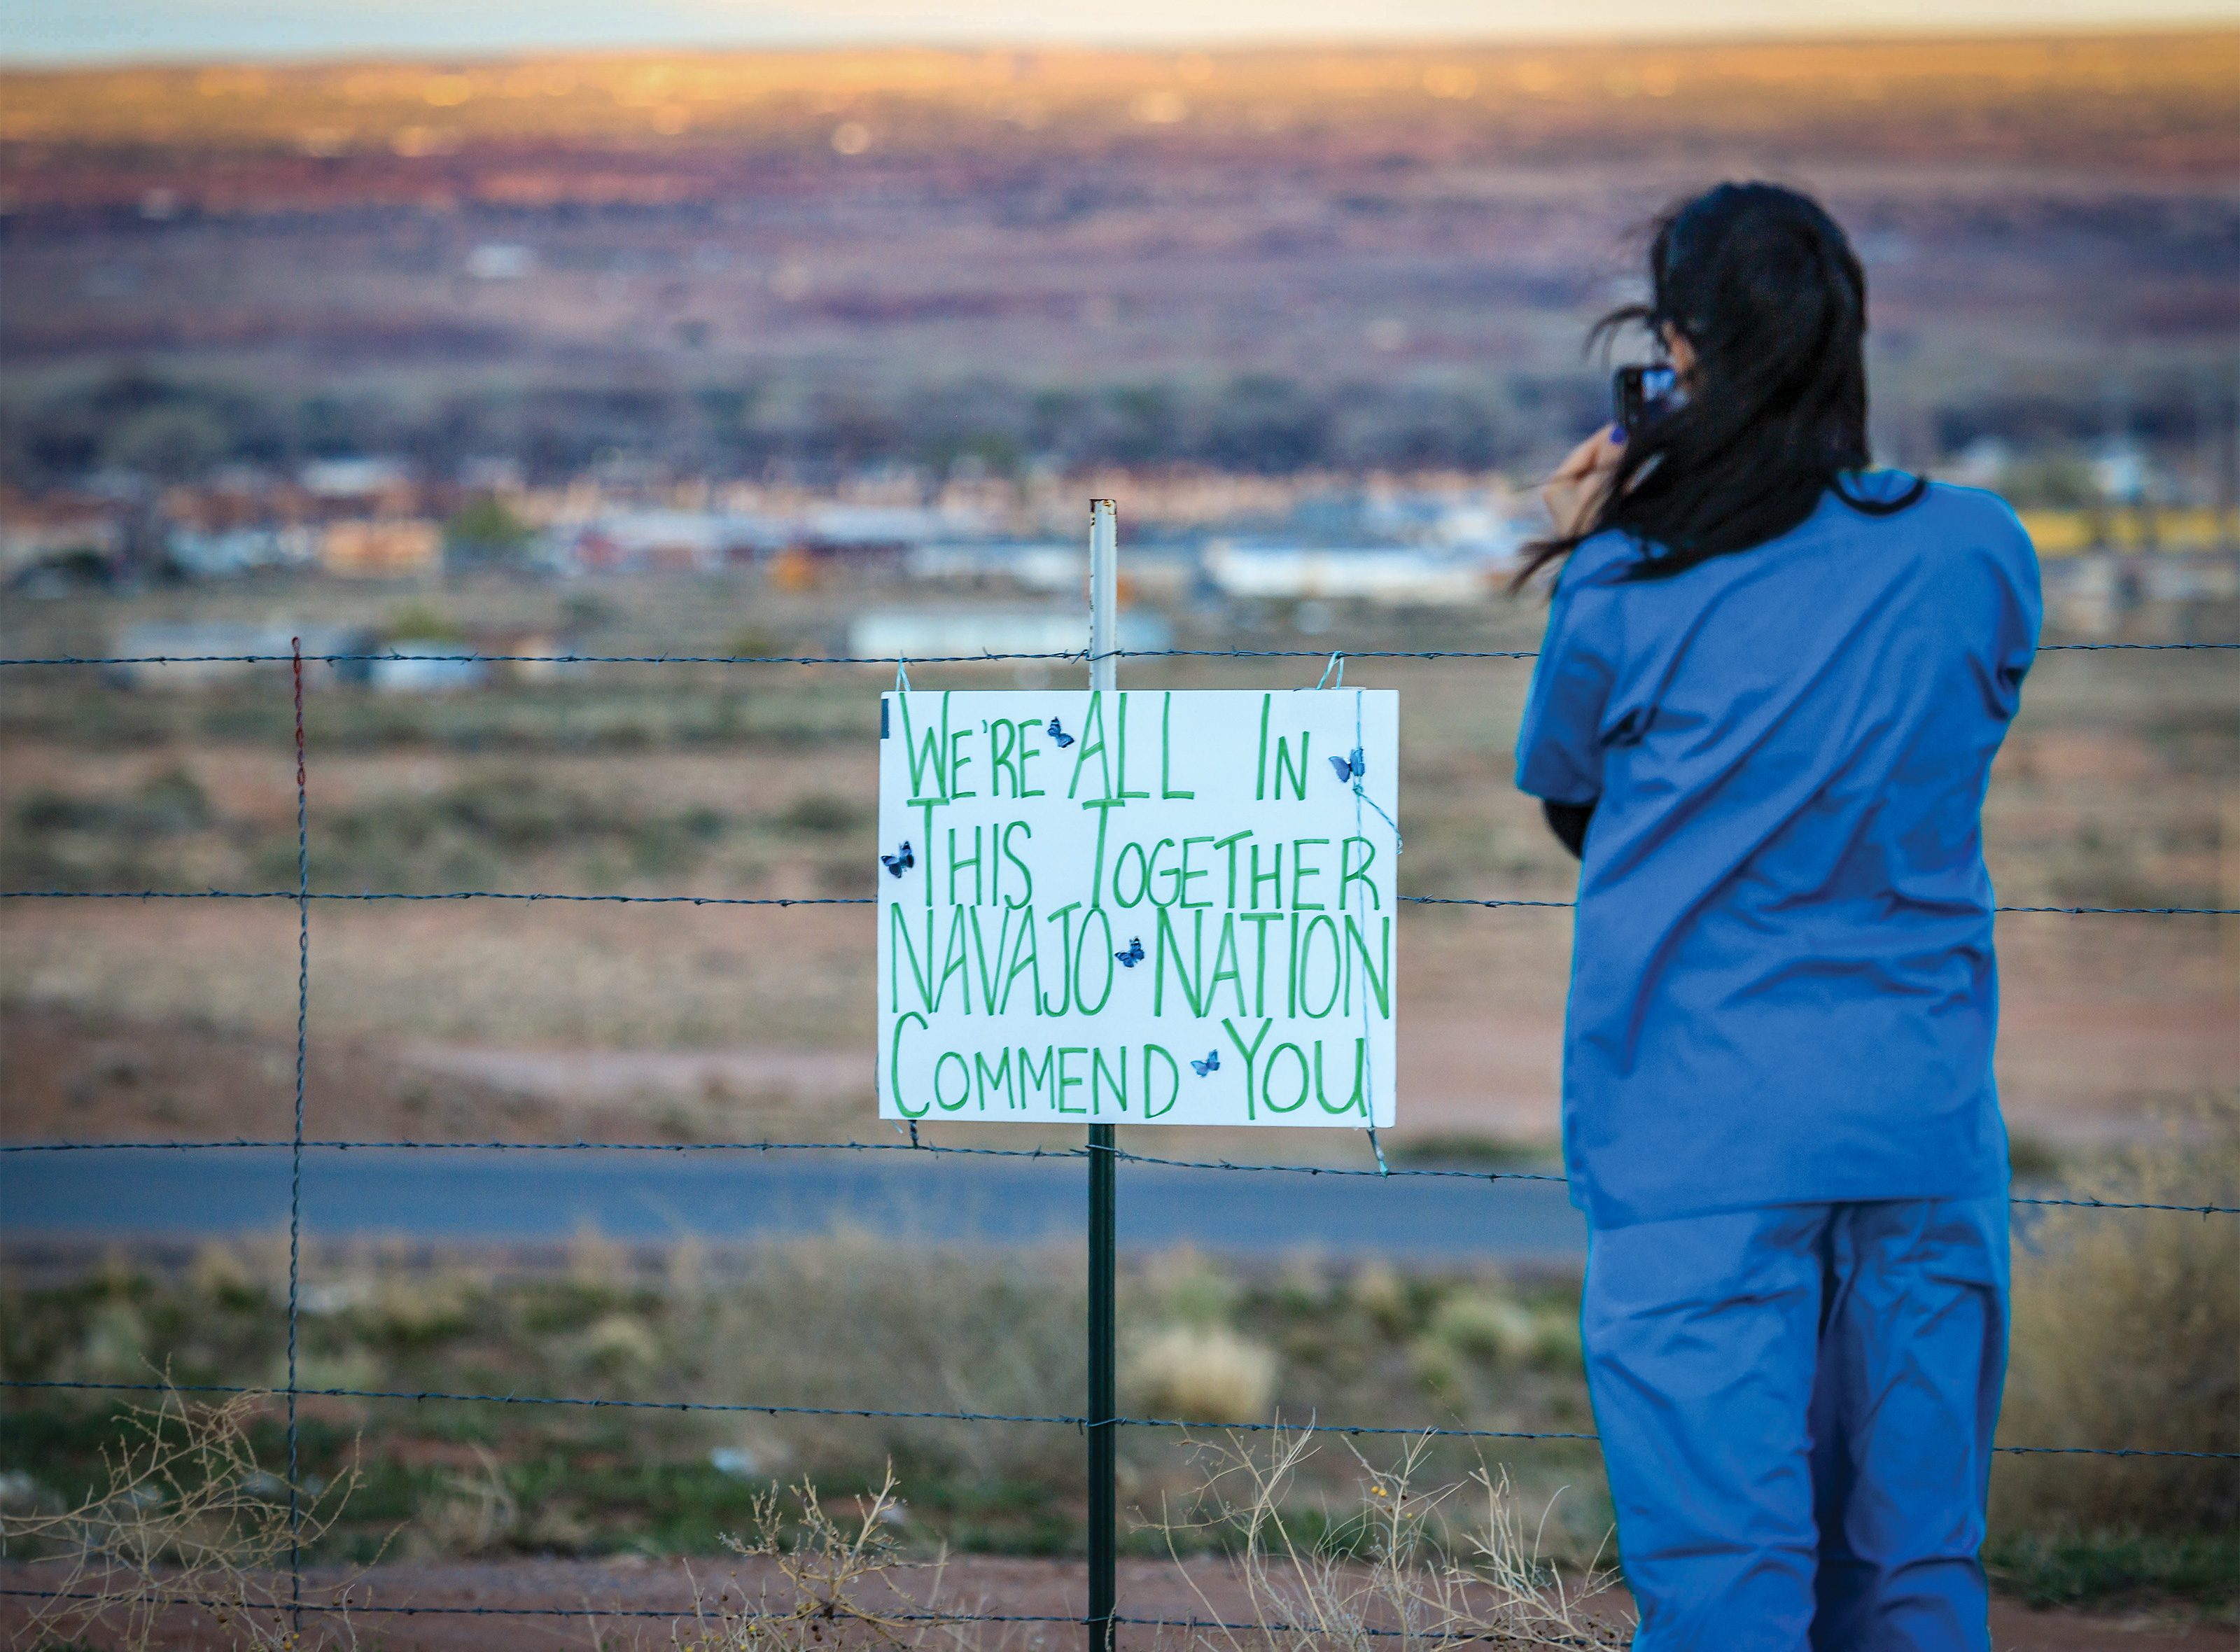 A nurse practitioner snaps a photo on April 8 in Apache County, Arizona—the middle of the Navajo Nation. Beside her, a handmade sign thanks local hospital staff during the pandemic. 